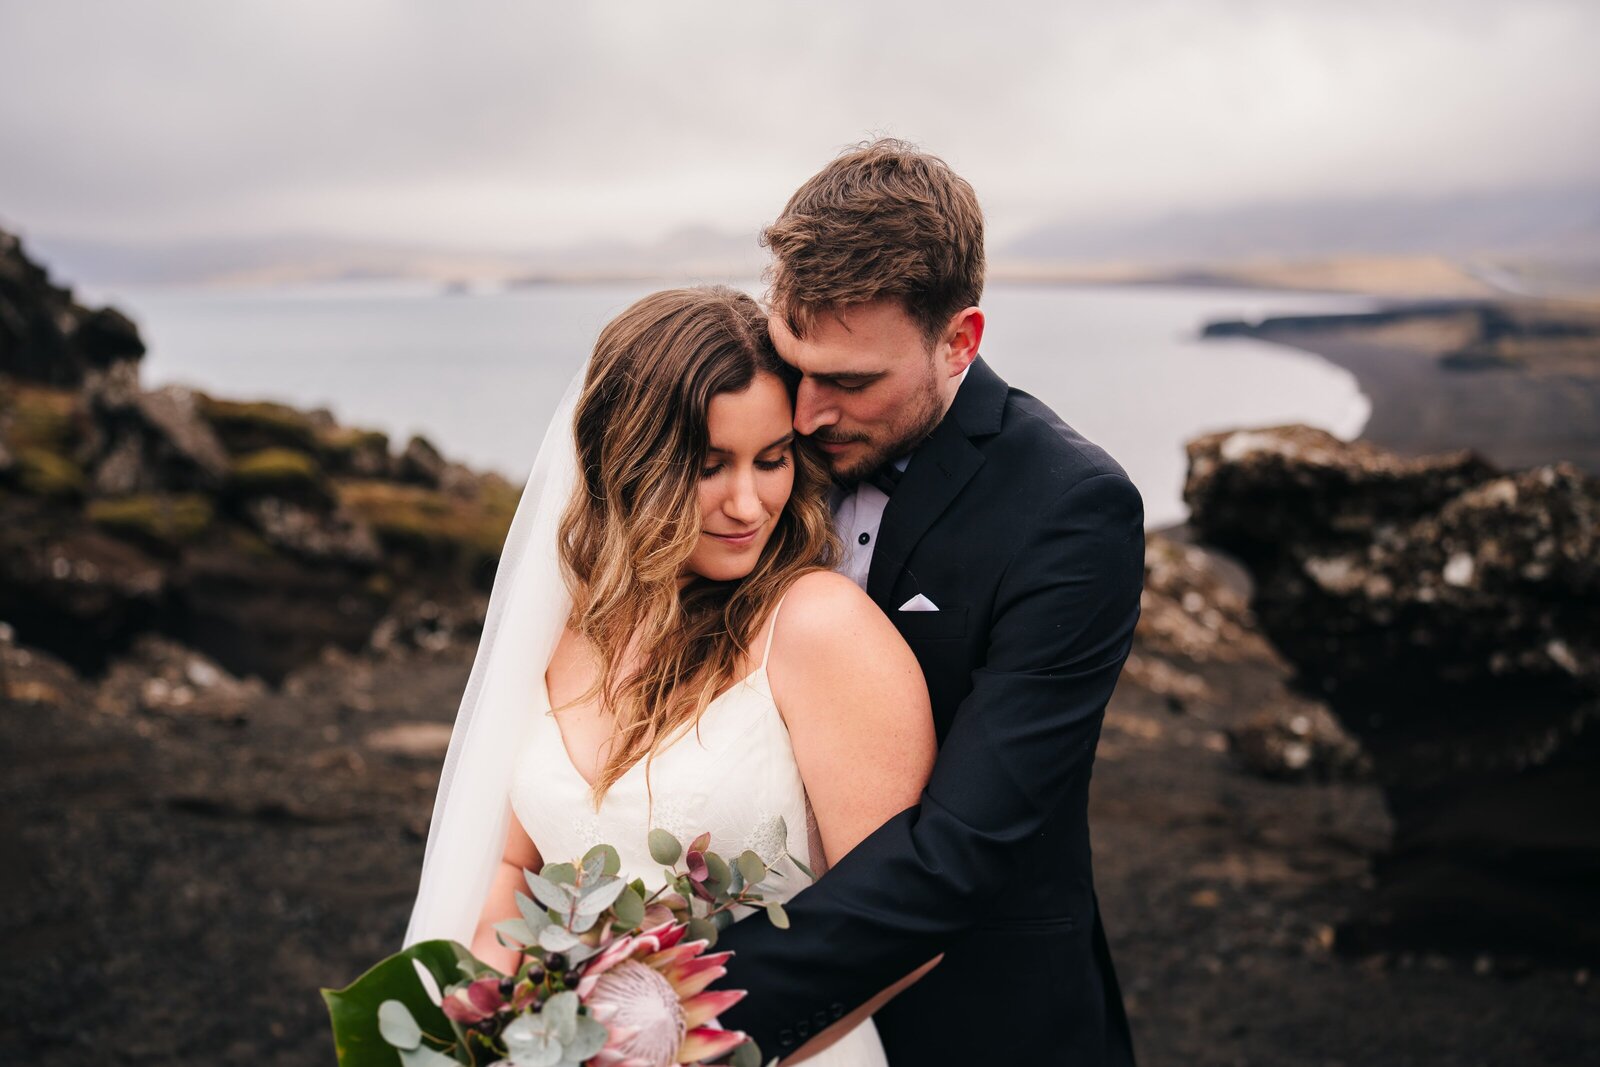 Couple sharing an embrace during their elopement in Iceland